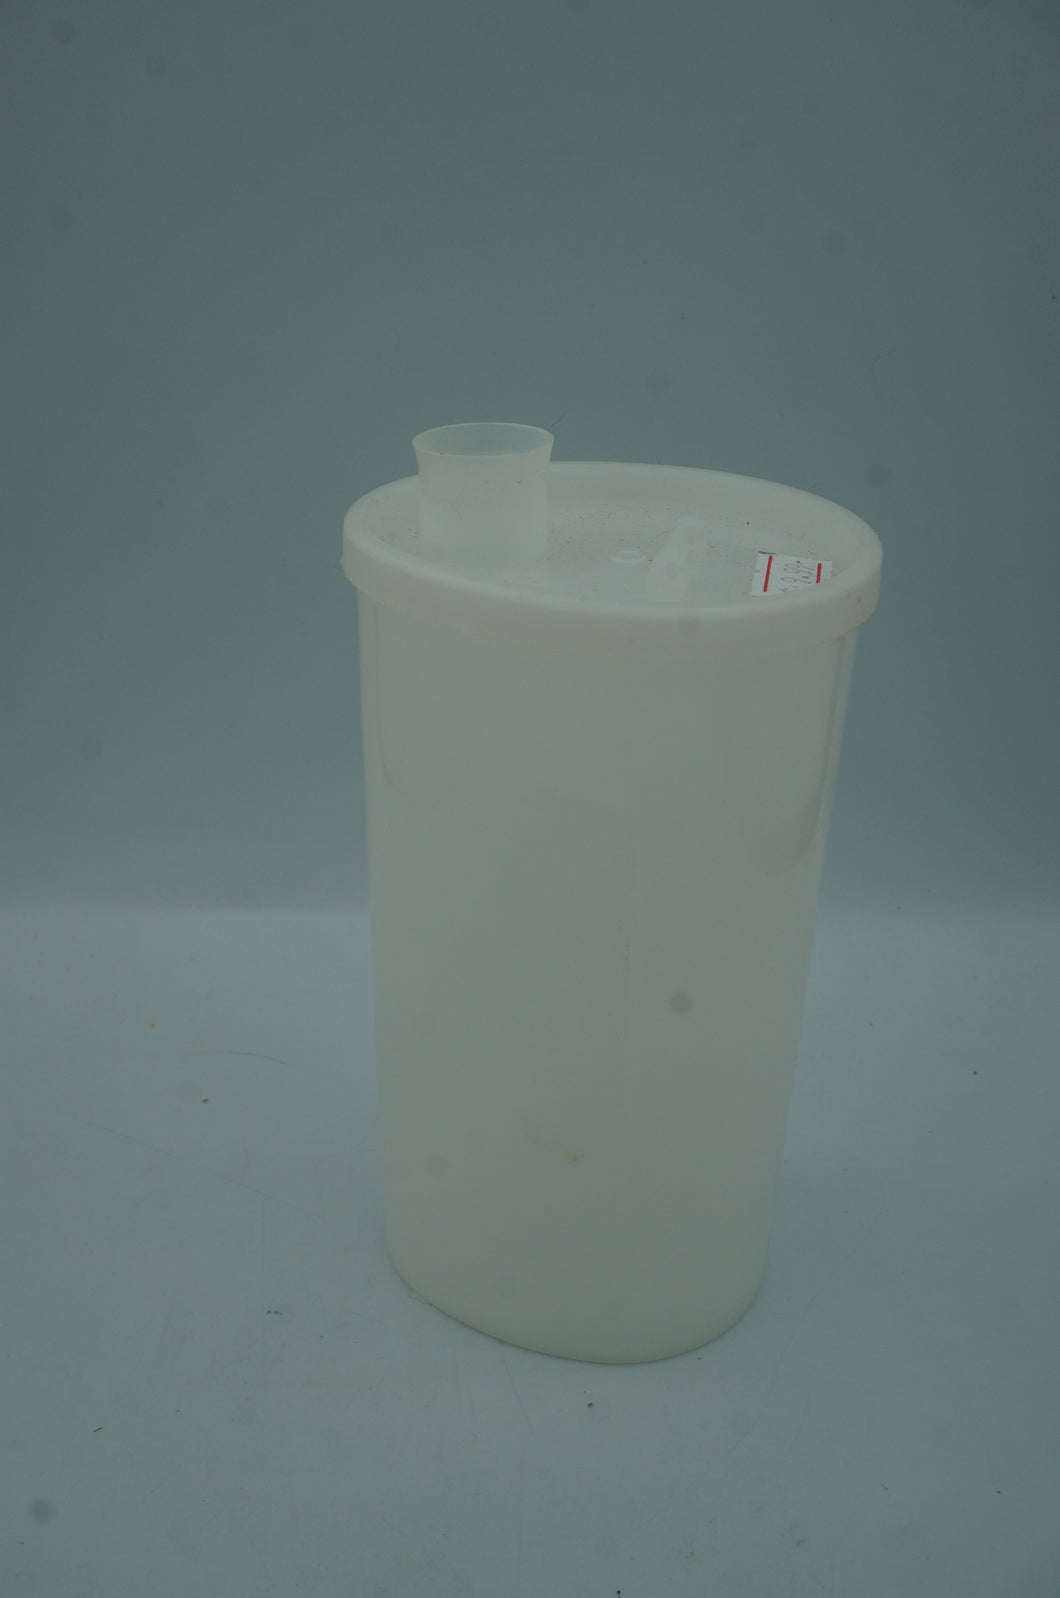 vintage Tupperware cup- ohiohippies.com